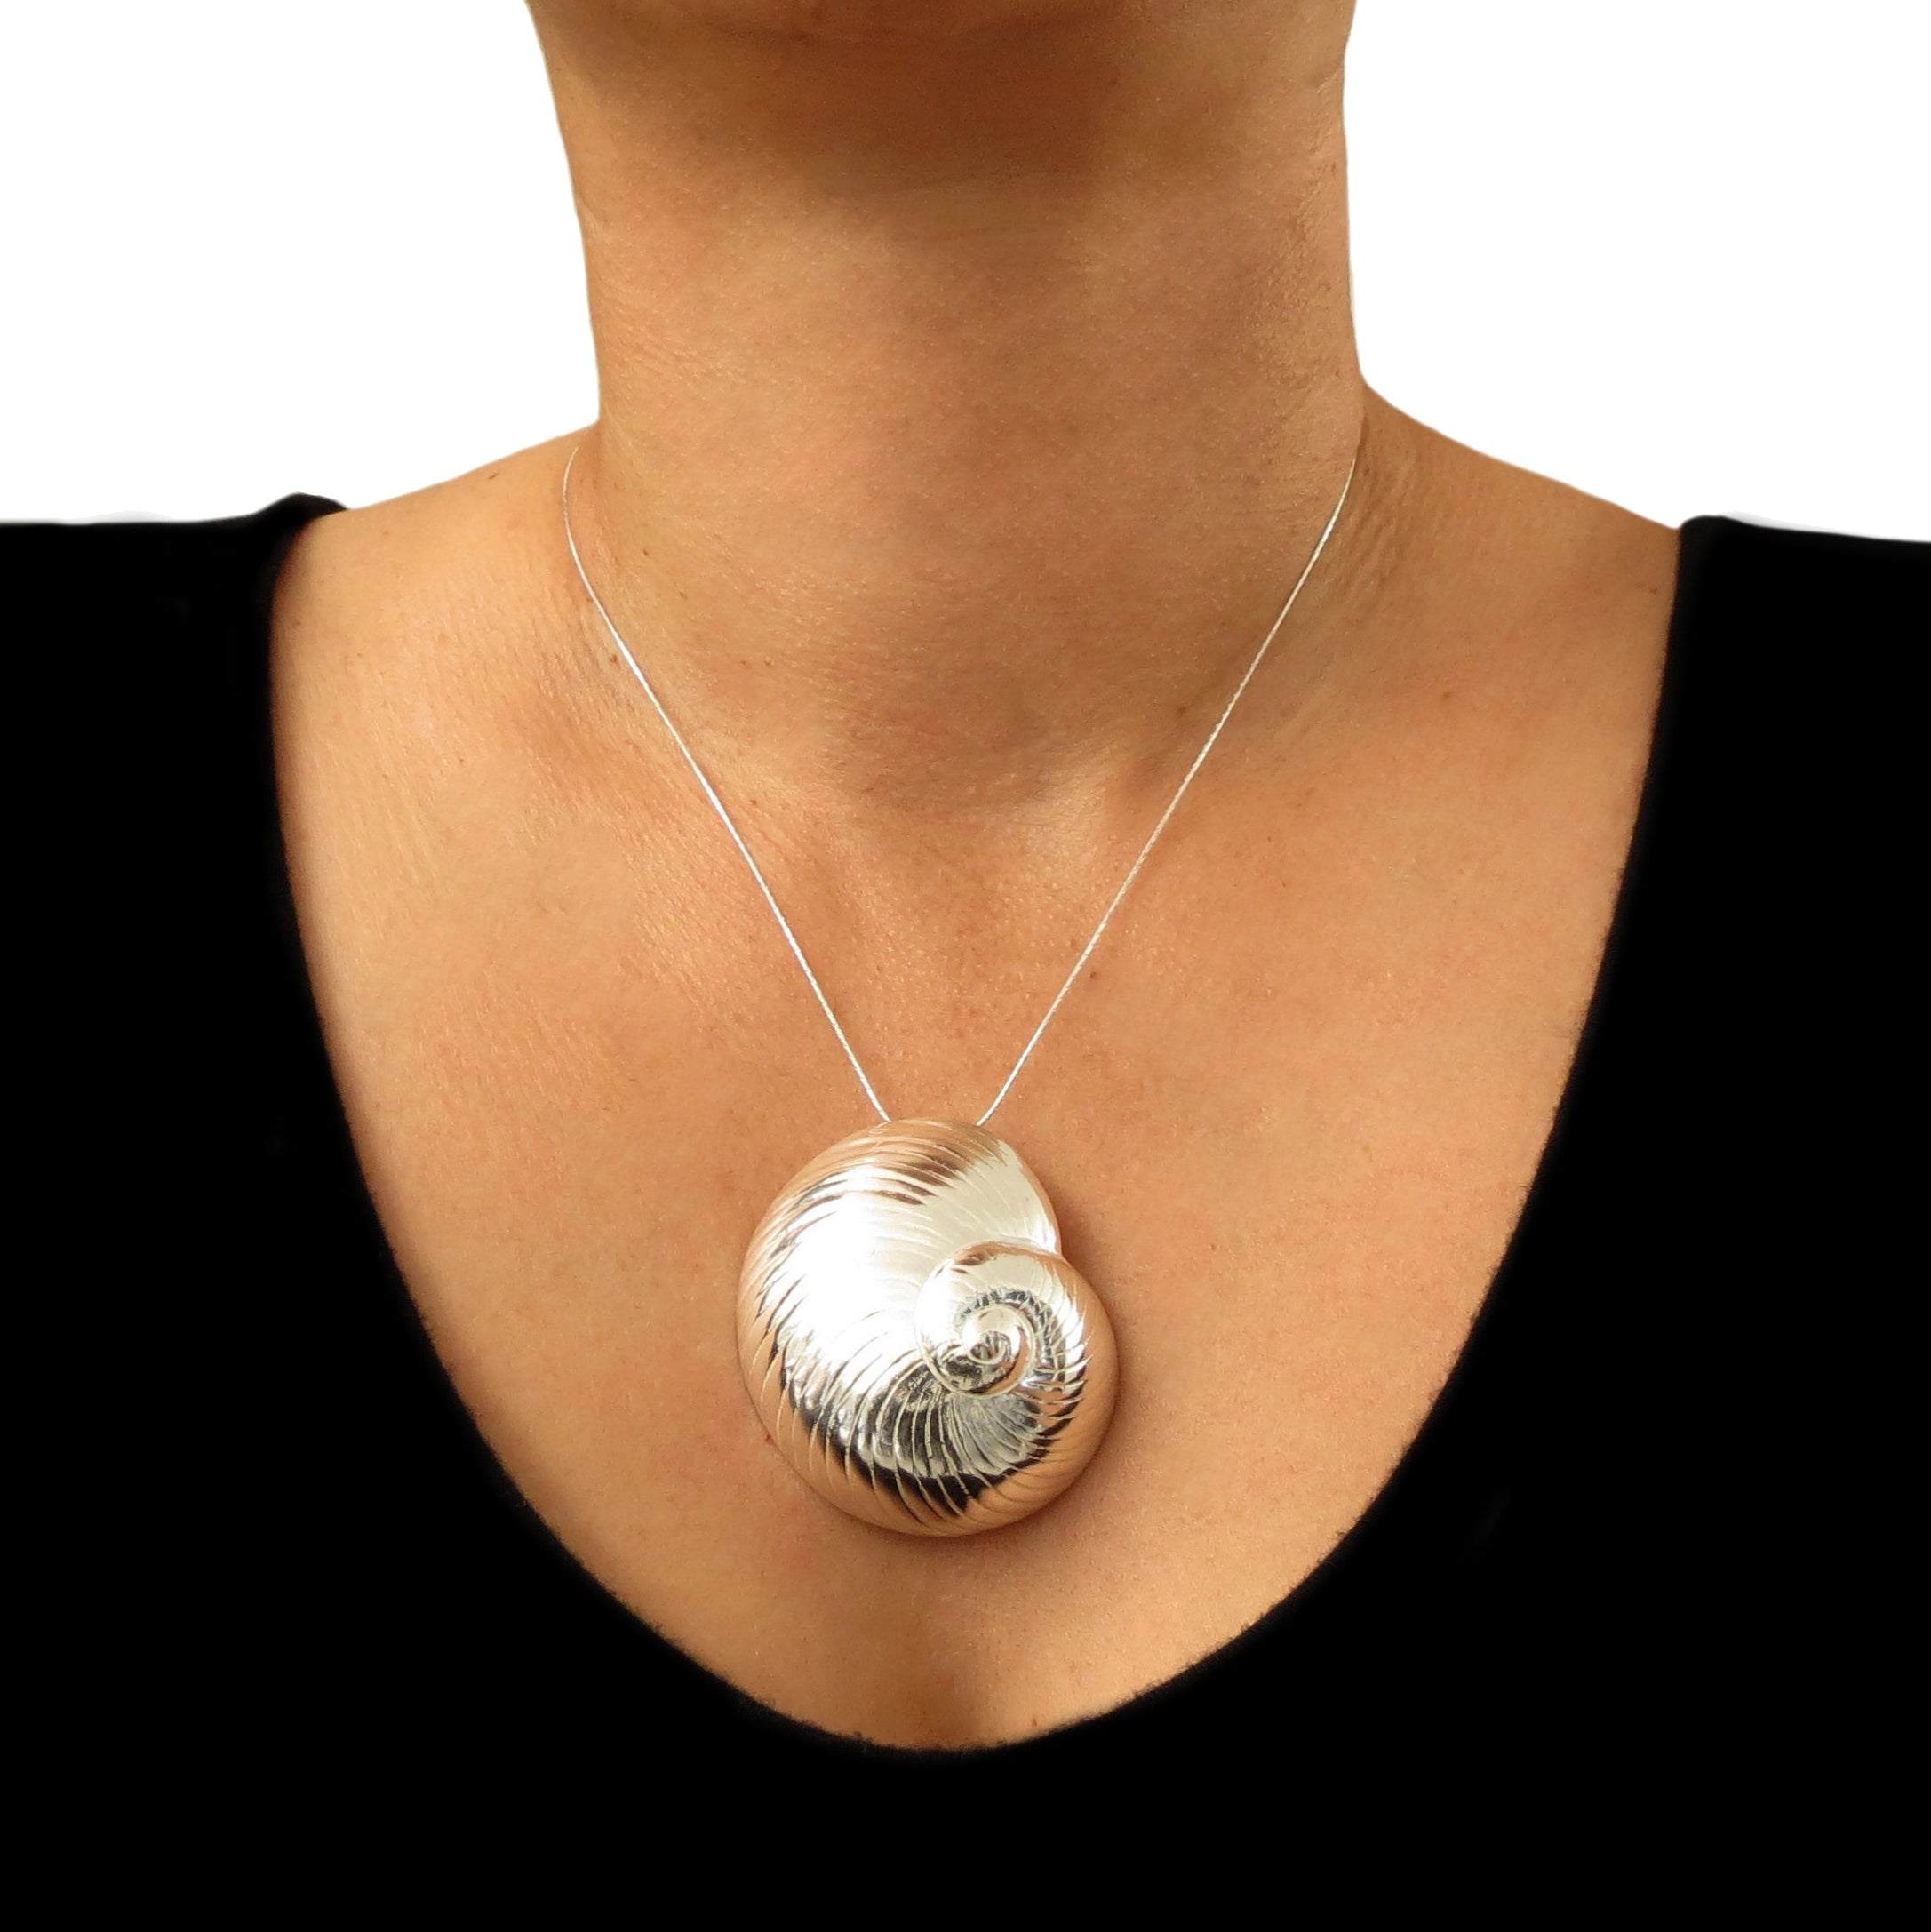 Silver Cowrie Necklace Real Cowrie Shell Charm Sterling Silver Dipped  Cowrie Pendant Seashell Necklace Boho Genuine Silver Shell Ball Chain -  Etsy | Cowrie shell necklace, Shell necklaces, Boho necklace